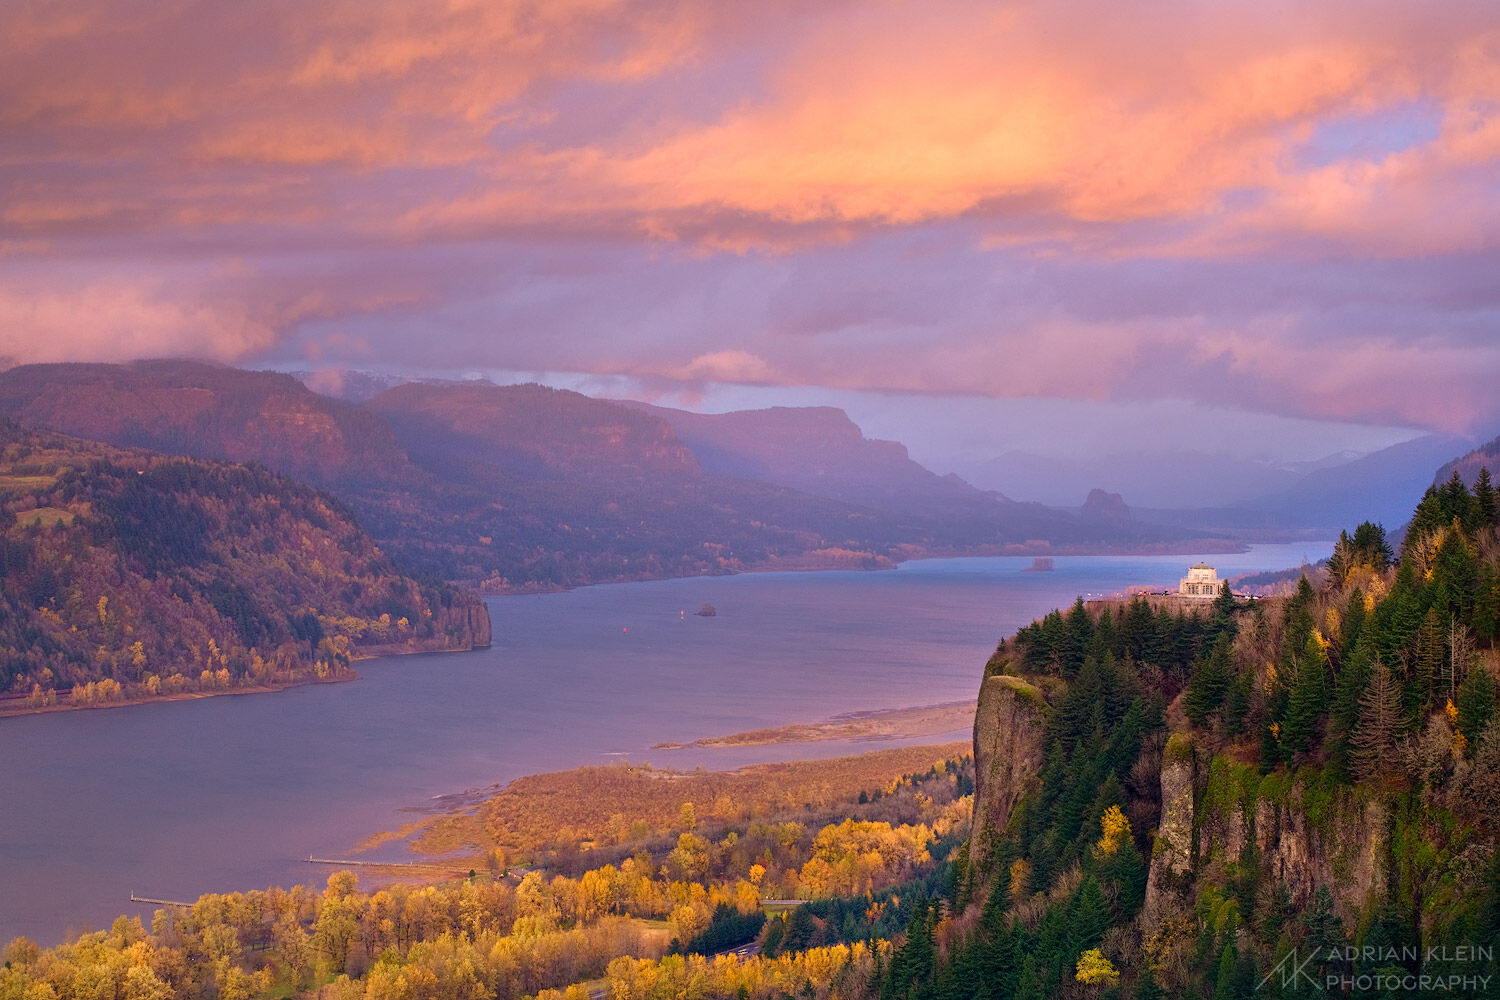 Sunset during fall season along the Columbia River Gorge, Oregon. Limited Edition of 50.